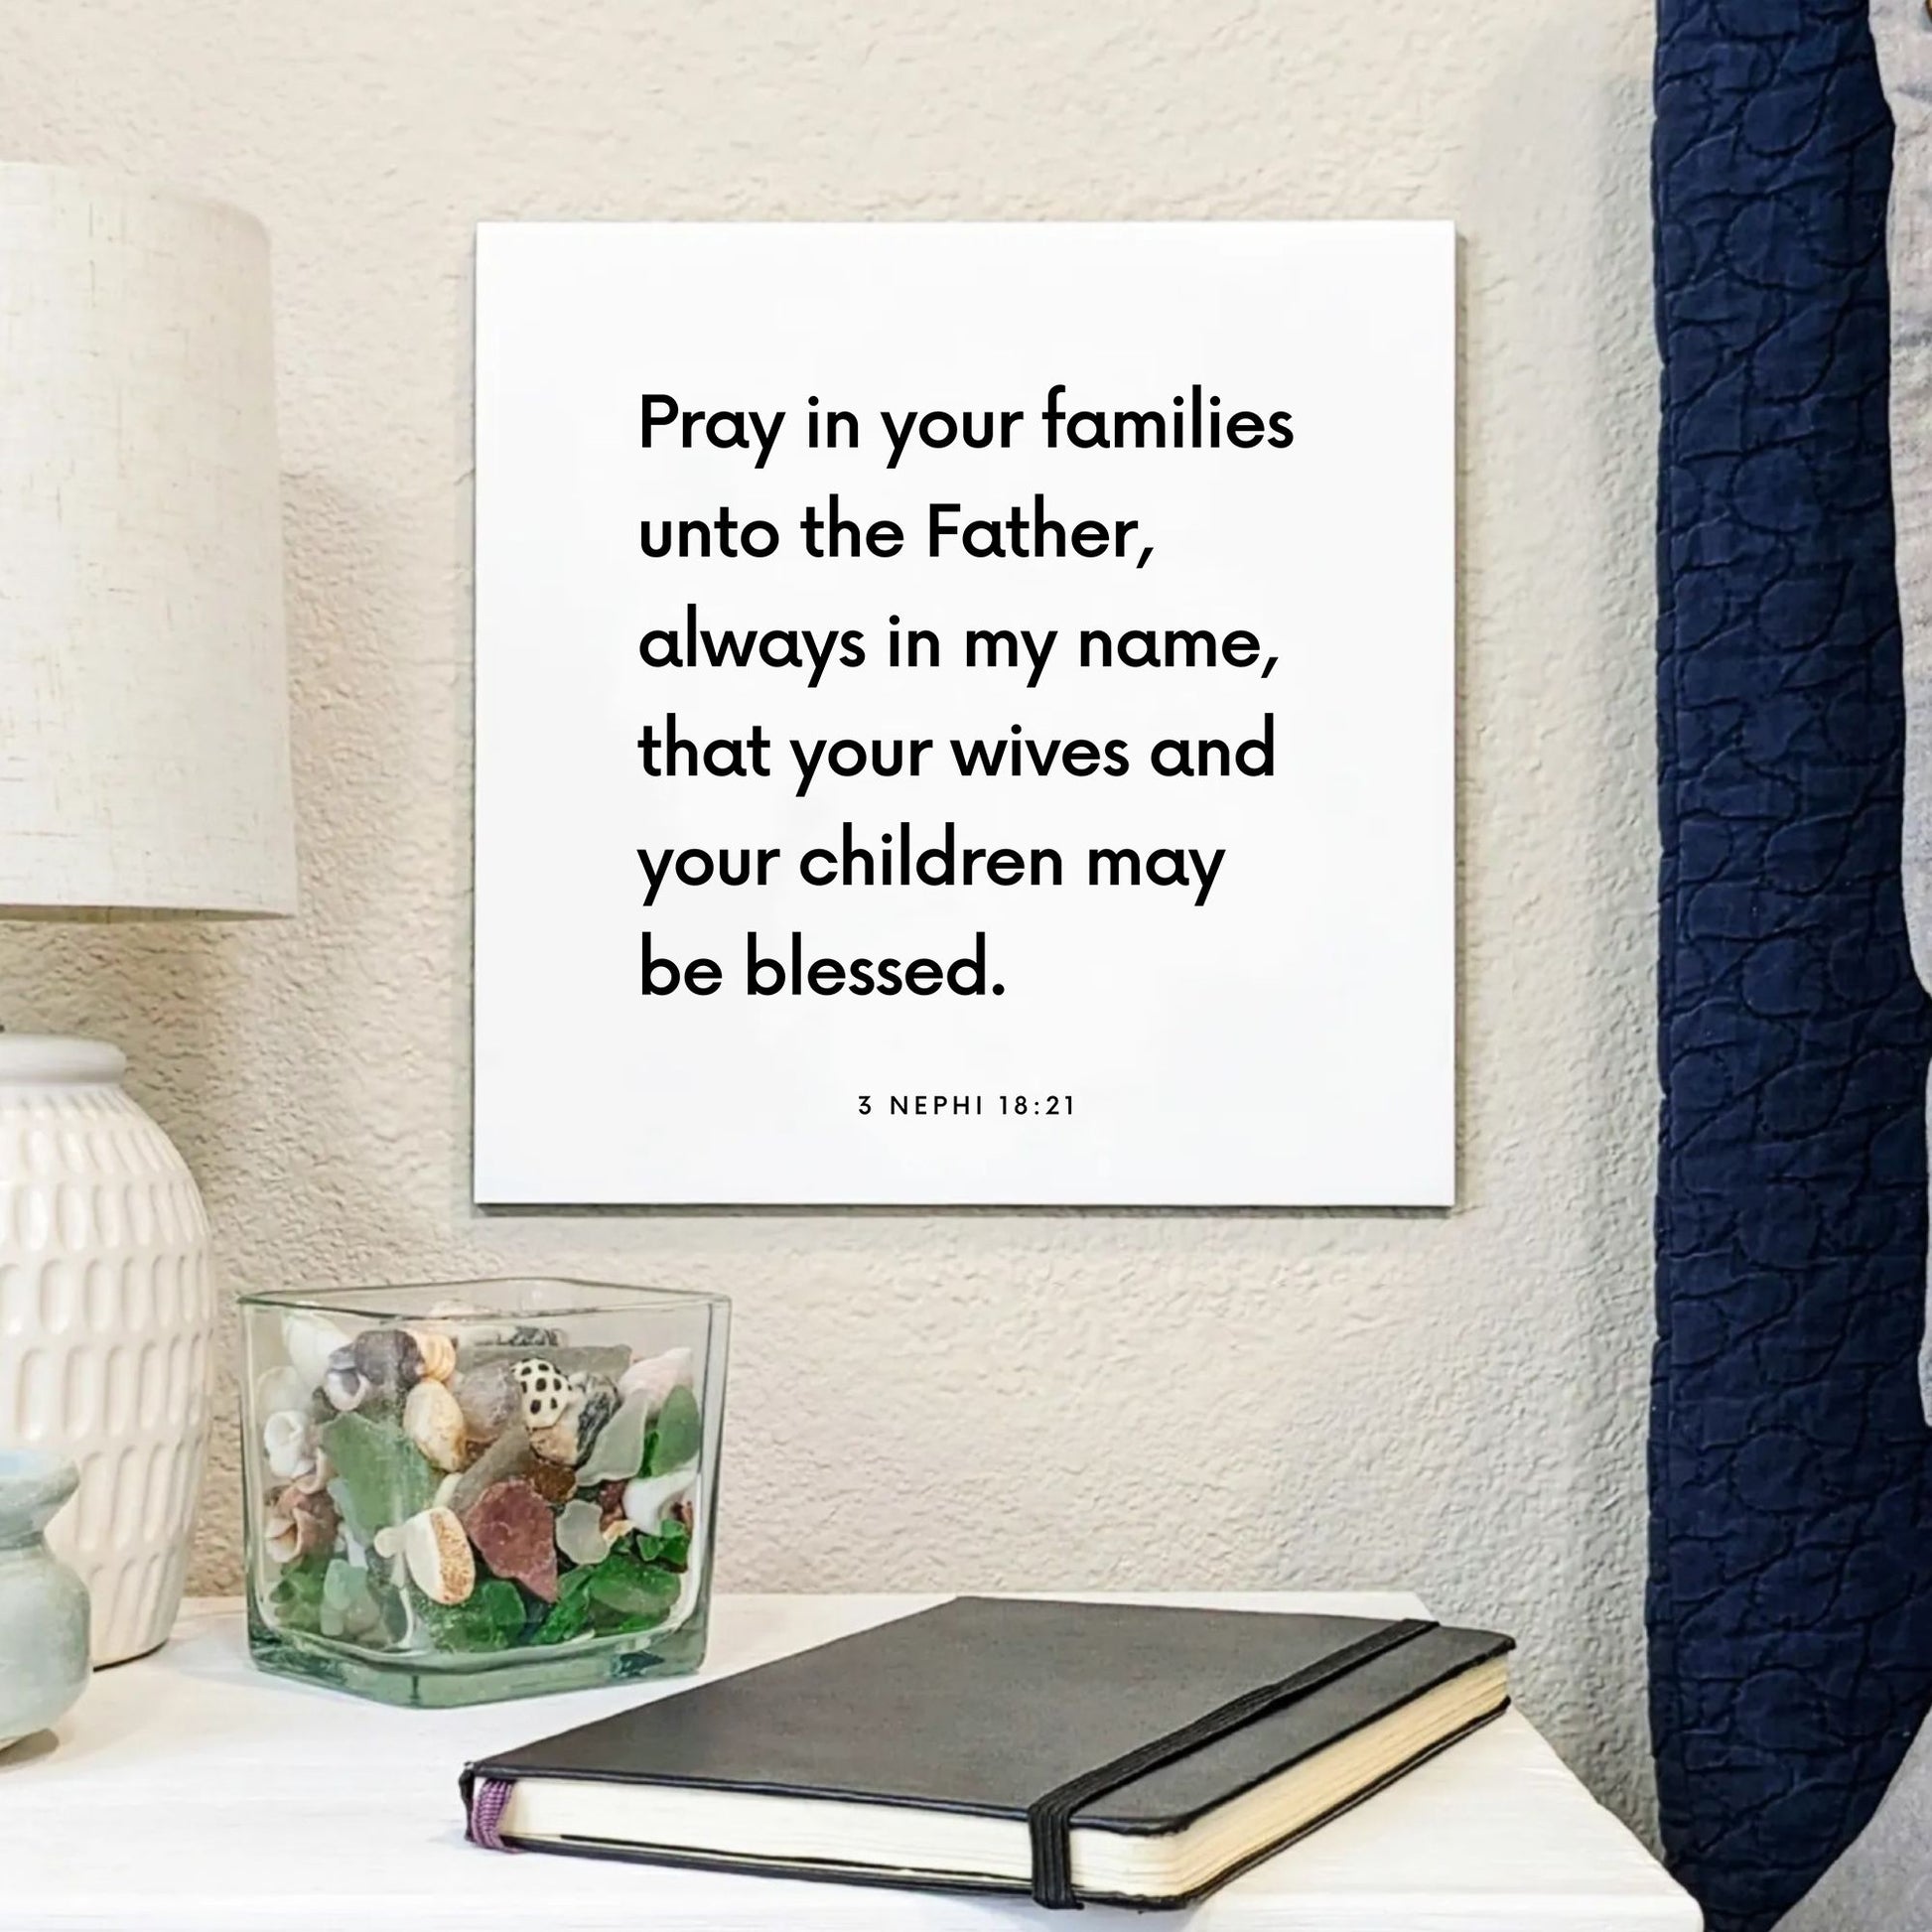 Bedside mouting of the scripture tile for 3 Nephi 18:21 - "Pray in your families unto the Father"